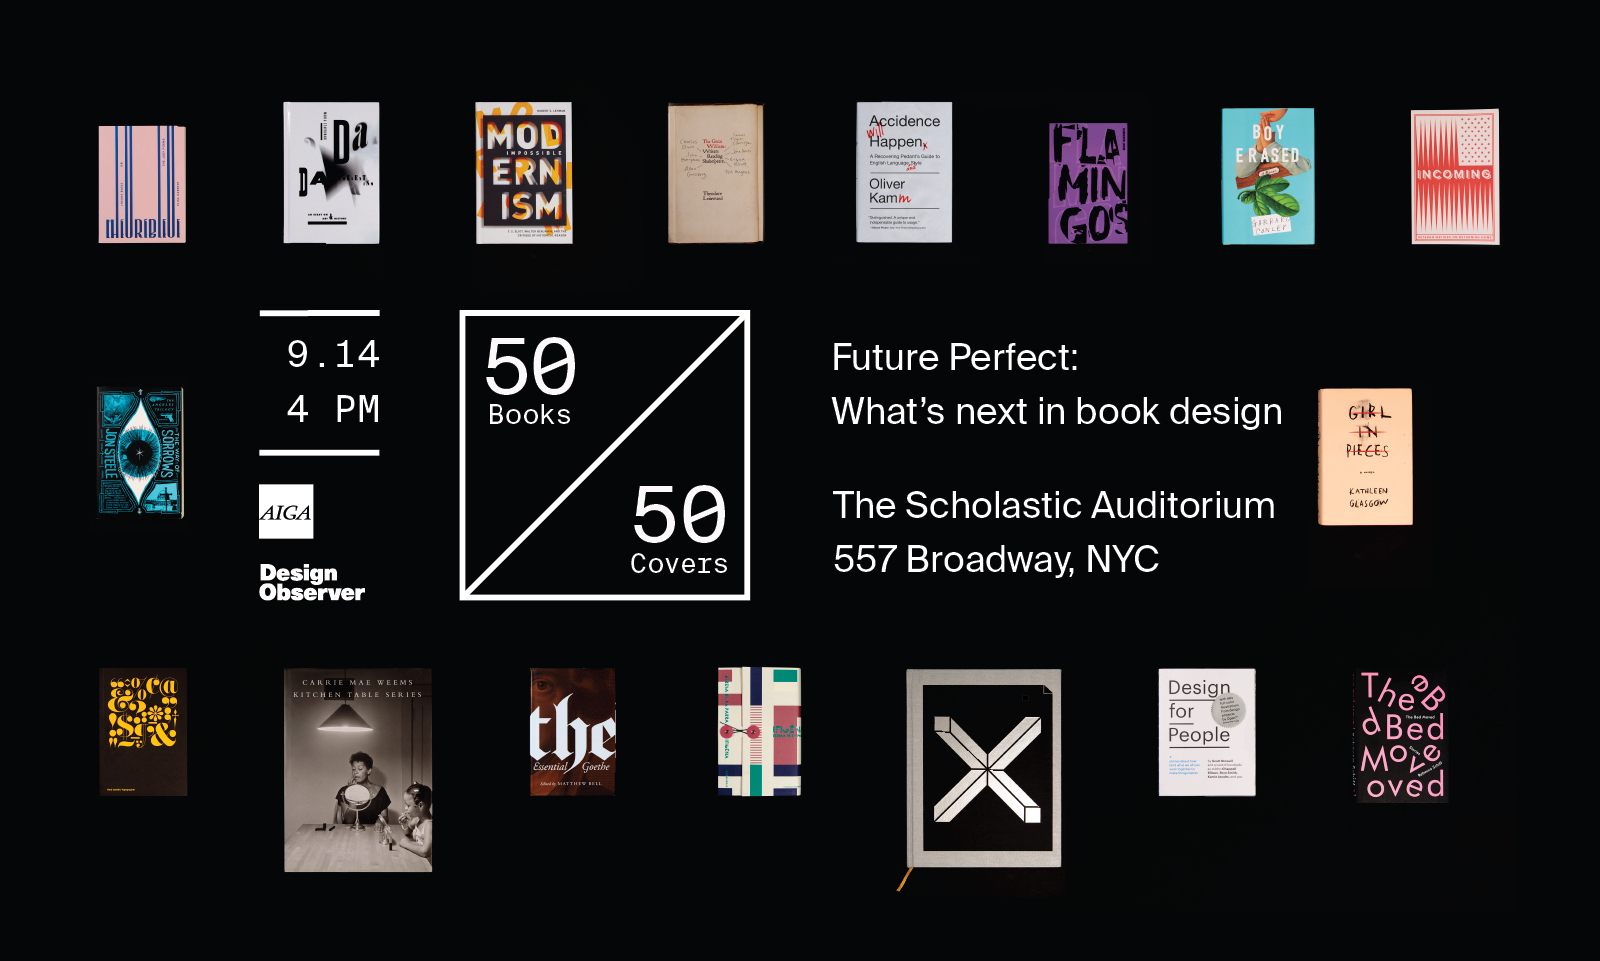 Future perfect: what's next in book design, a 50 Books | 50 Covers event